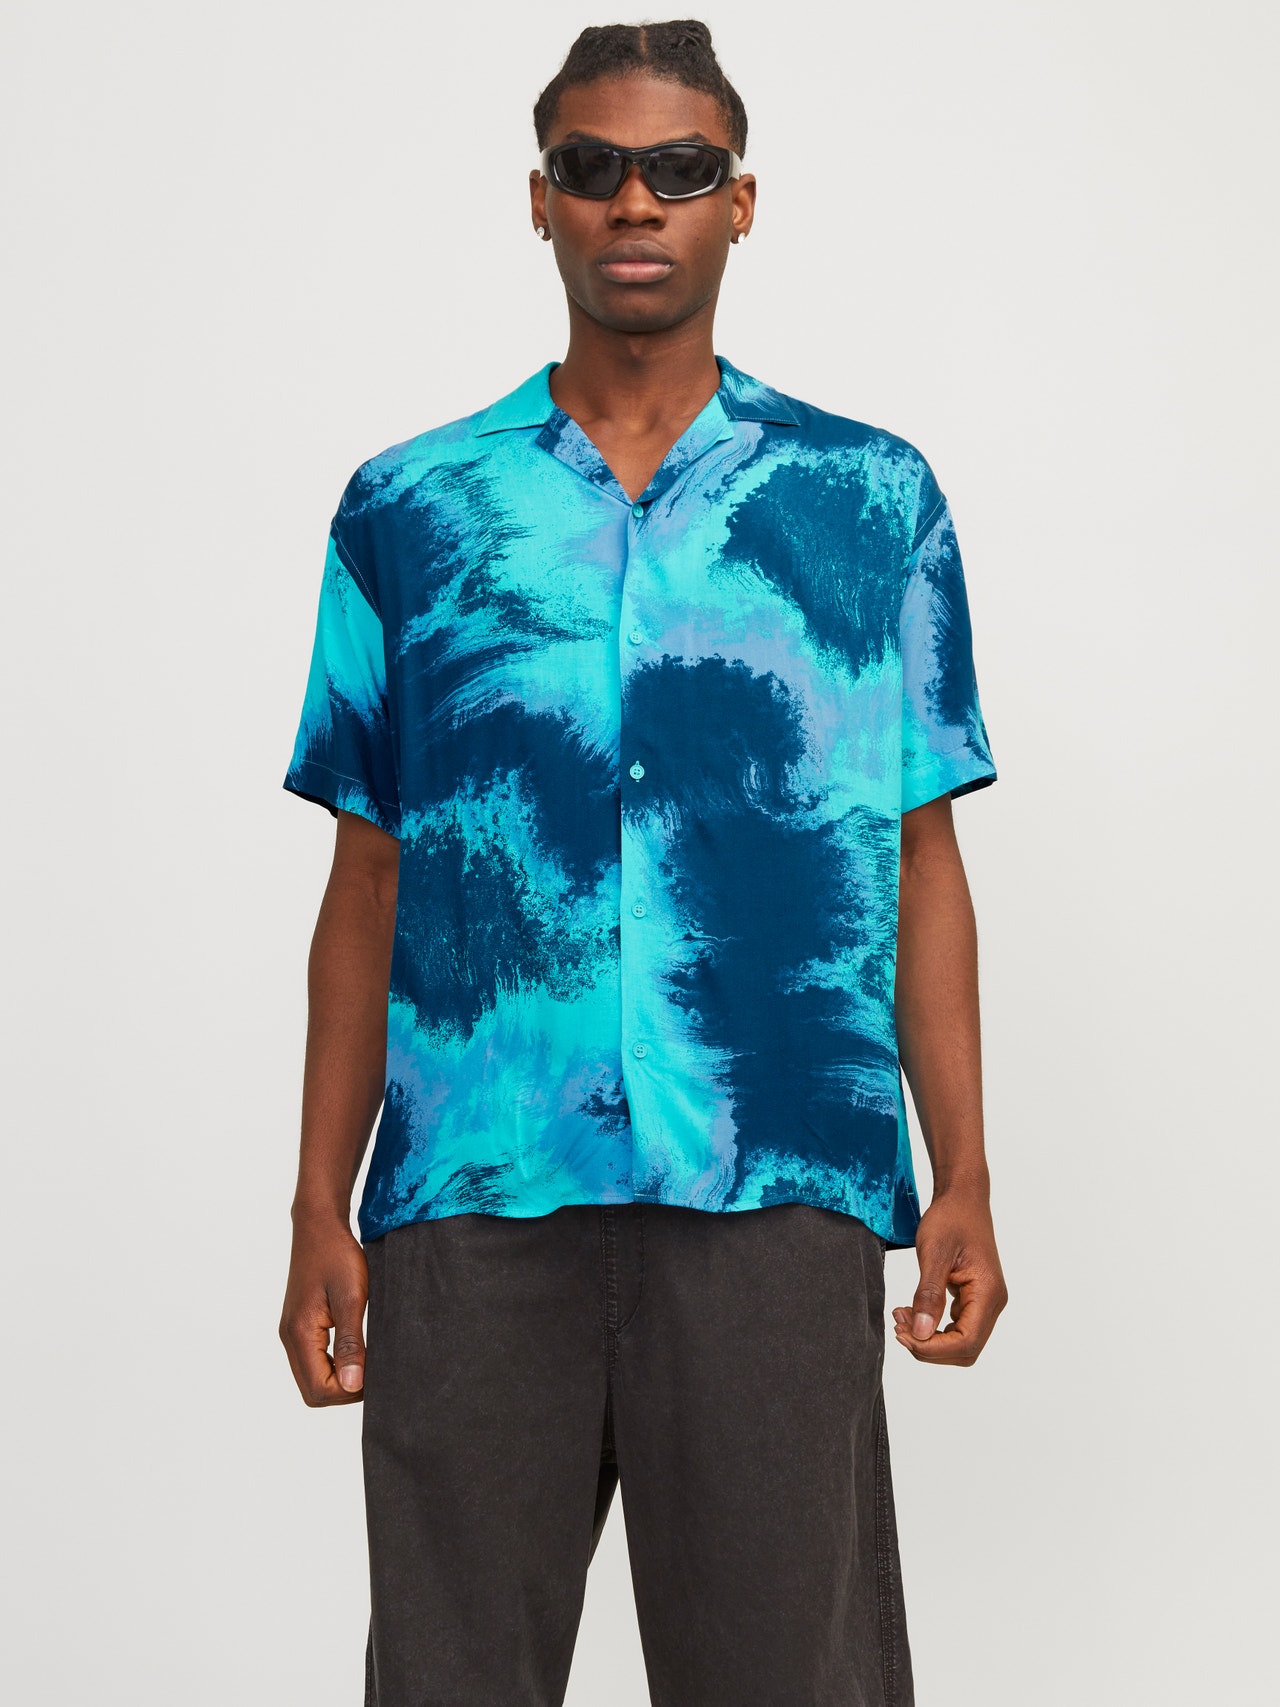 Jack & Jones Relaxed Fit Shirt -Pacific Coast - 12252536